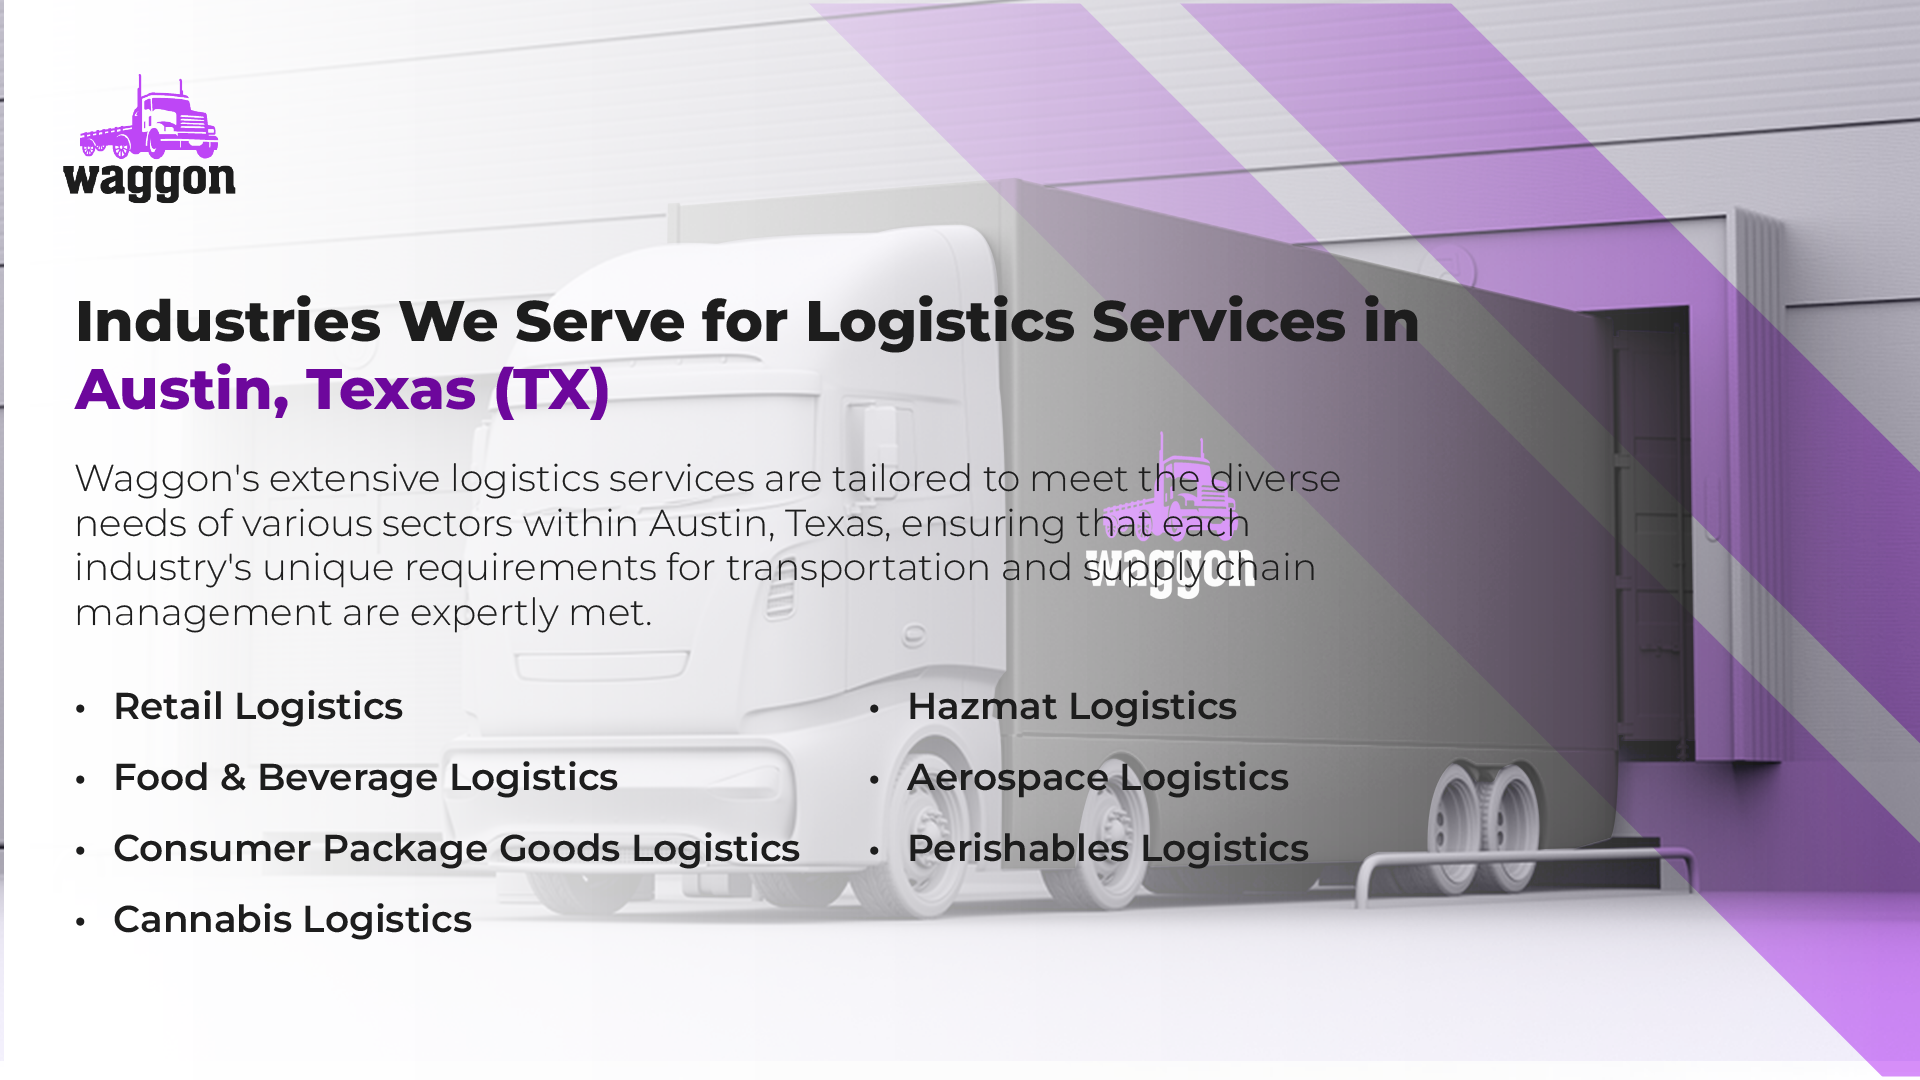 Industries We Serve for Logistics Services in Austin, Texas (TX)